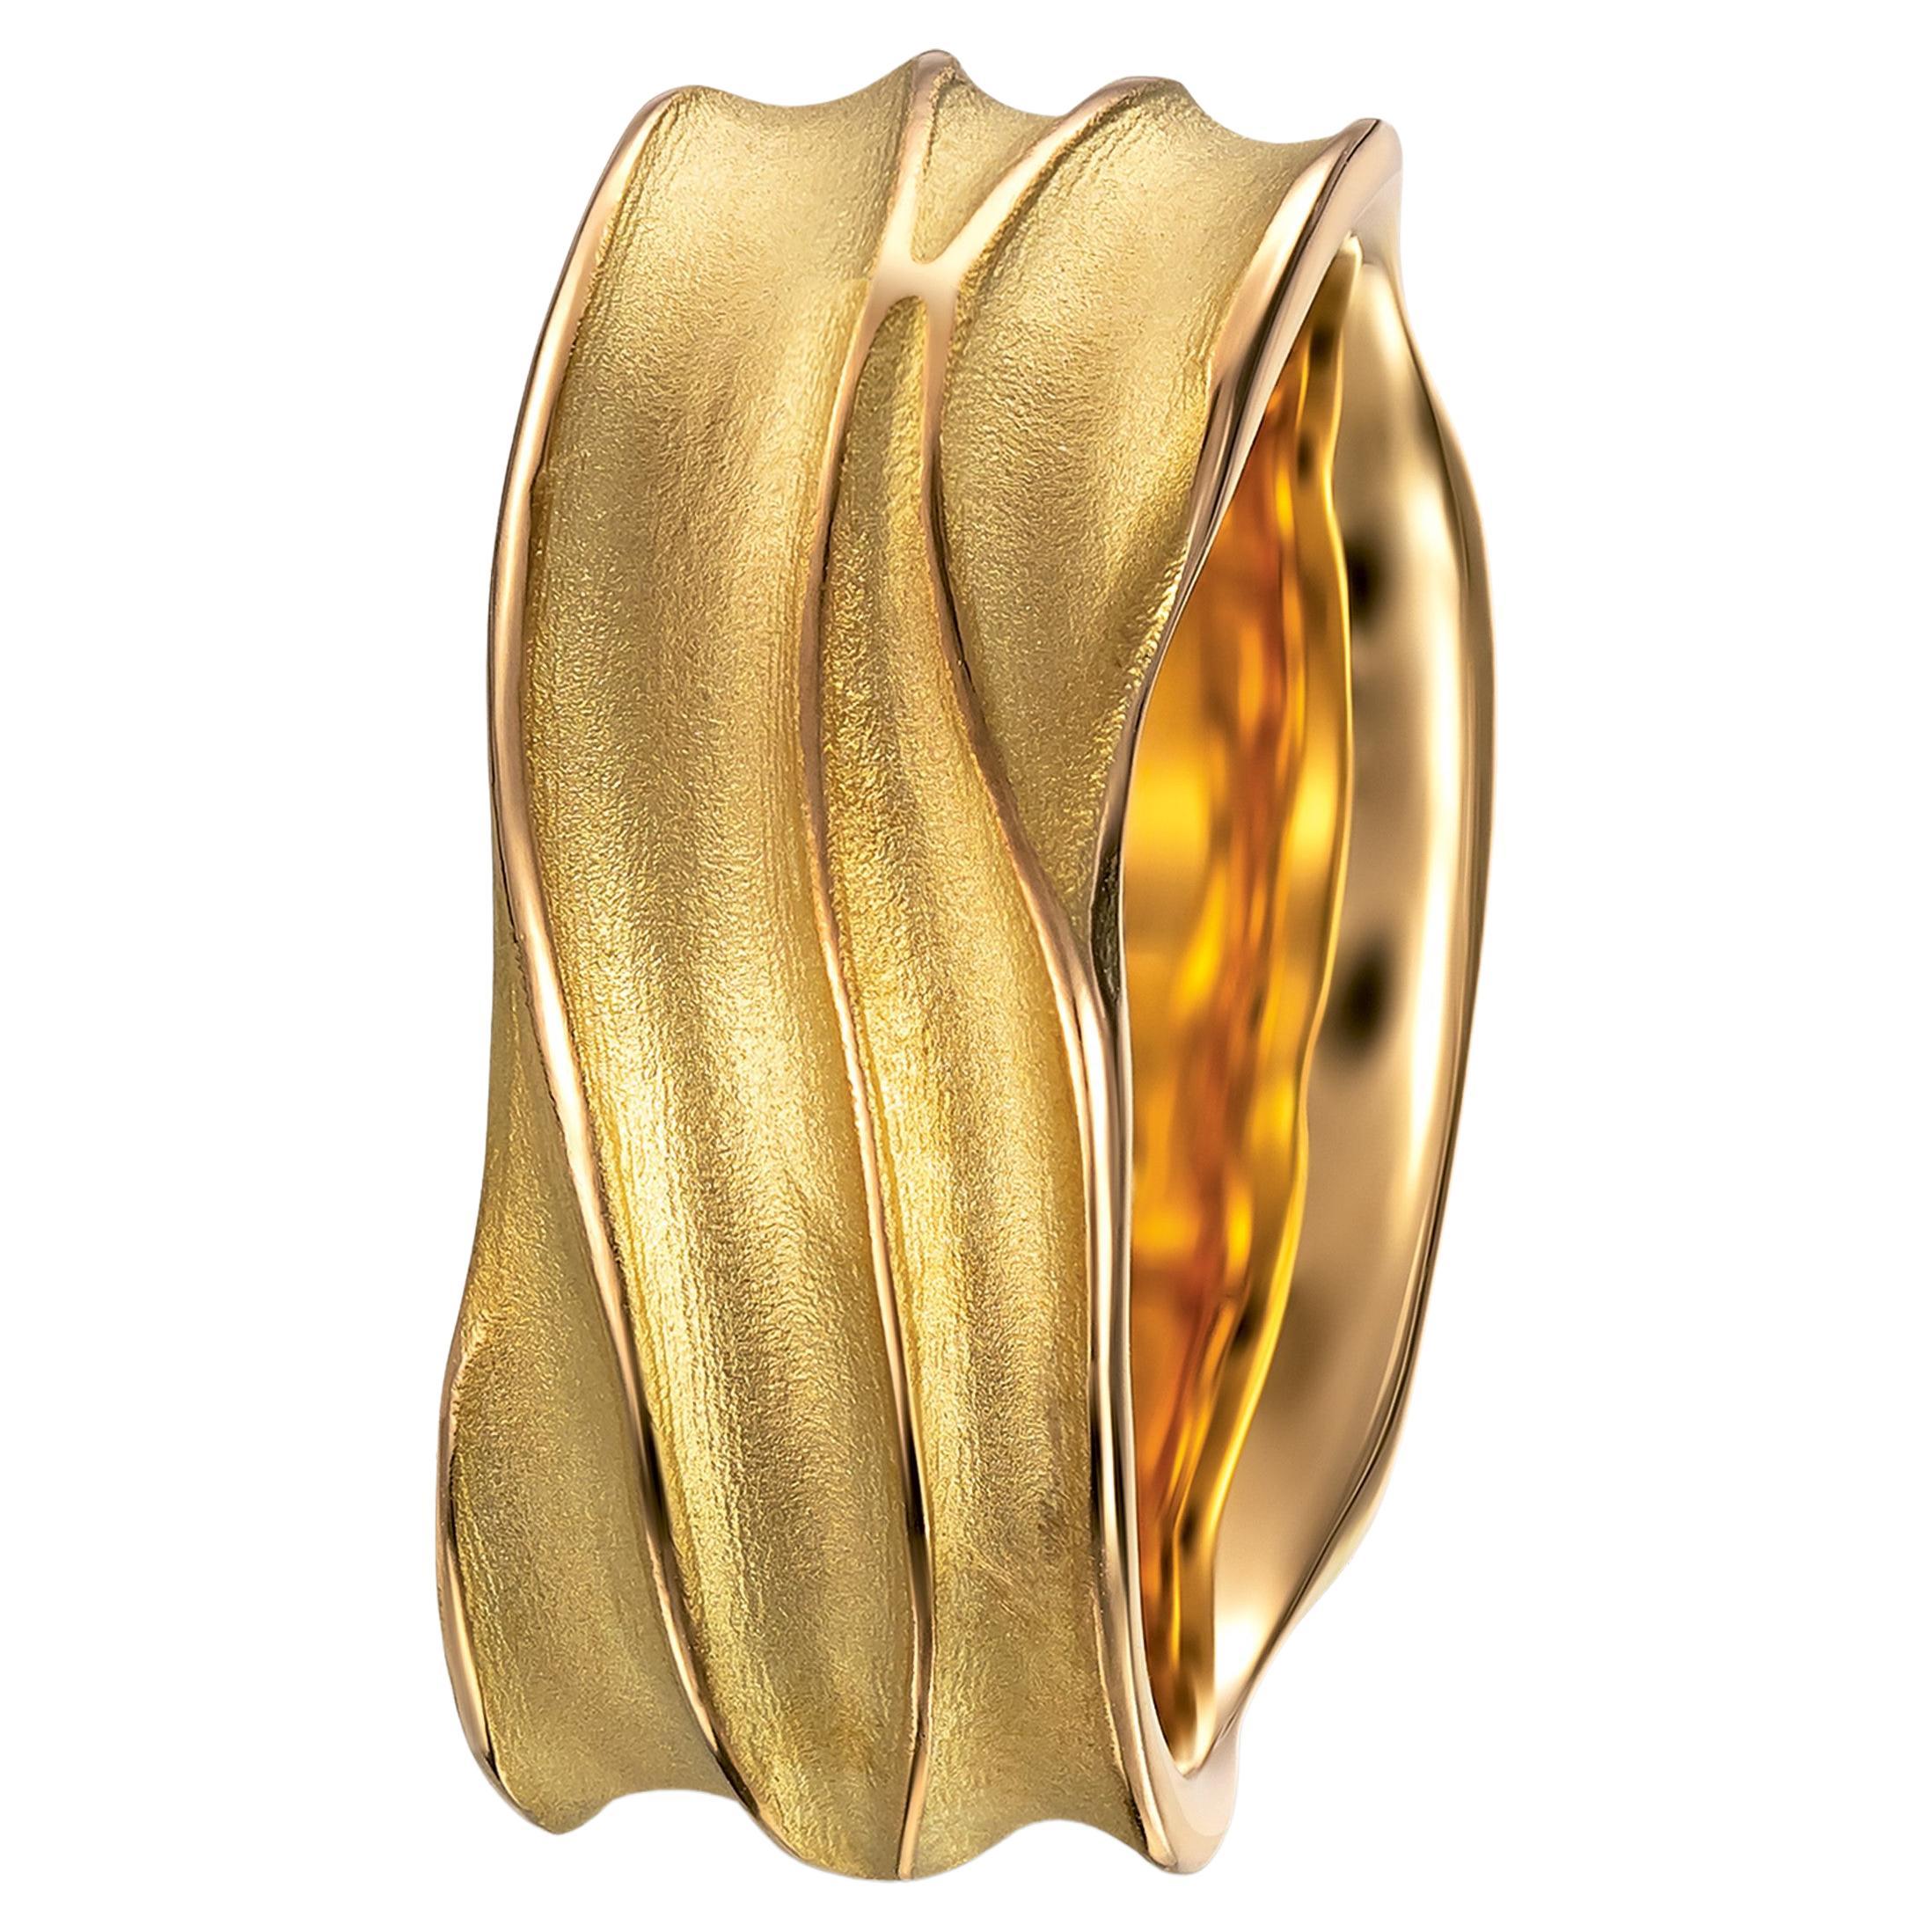 For Sale:  Furrer Jacot 18 Karat Yellow Gold Wave Band